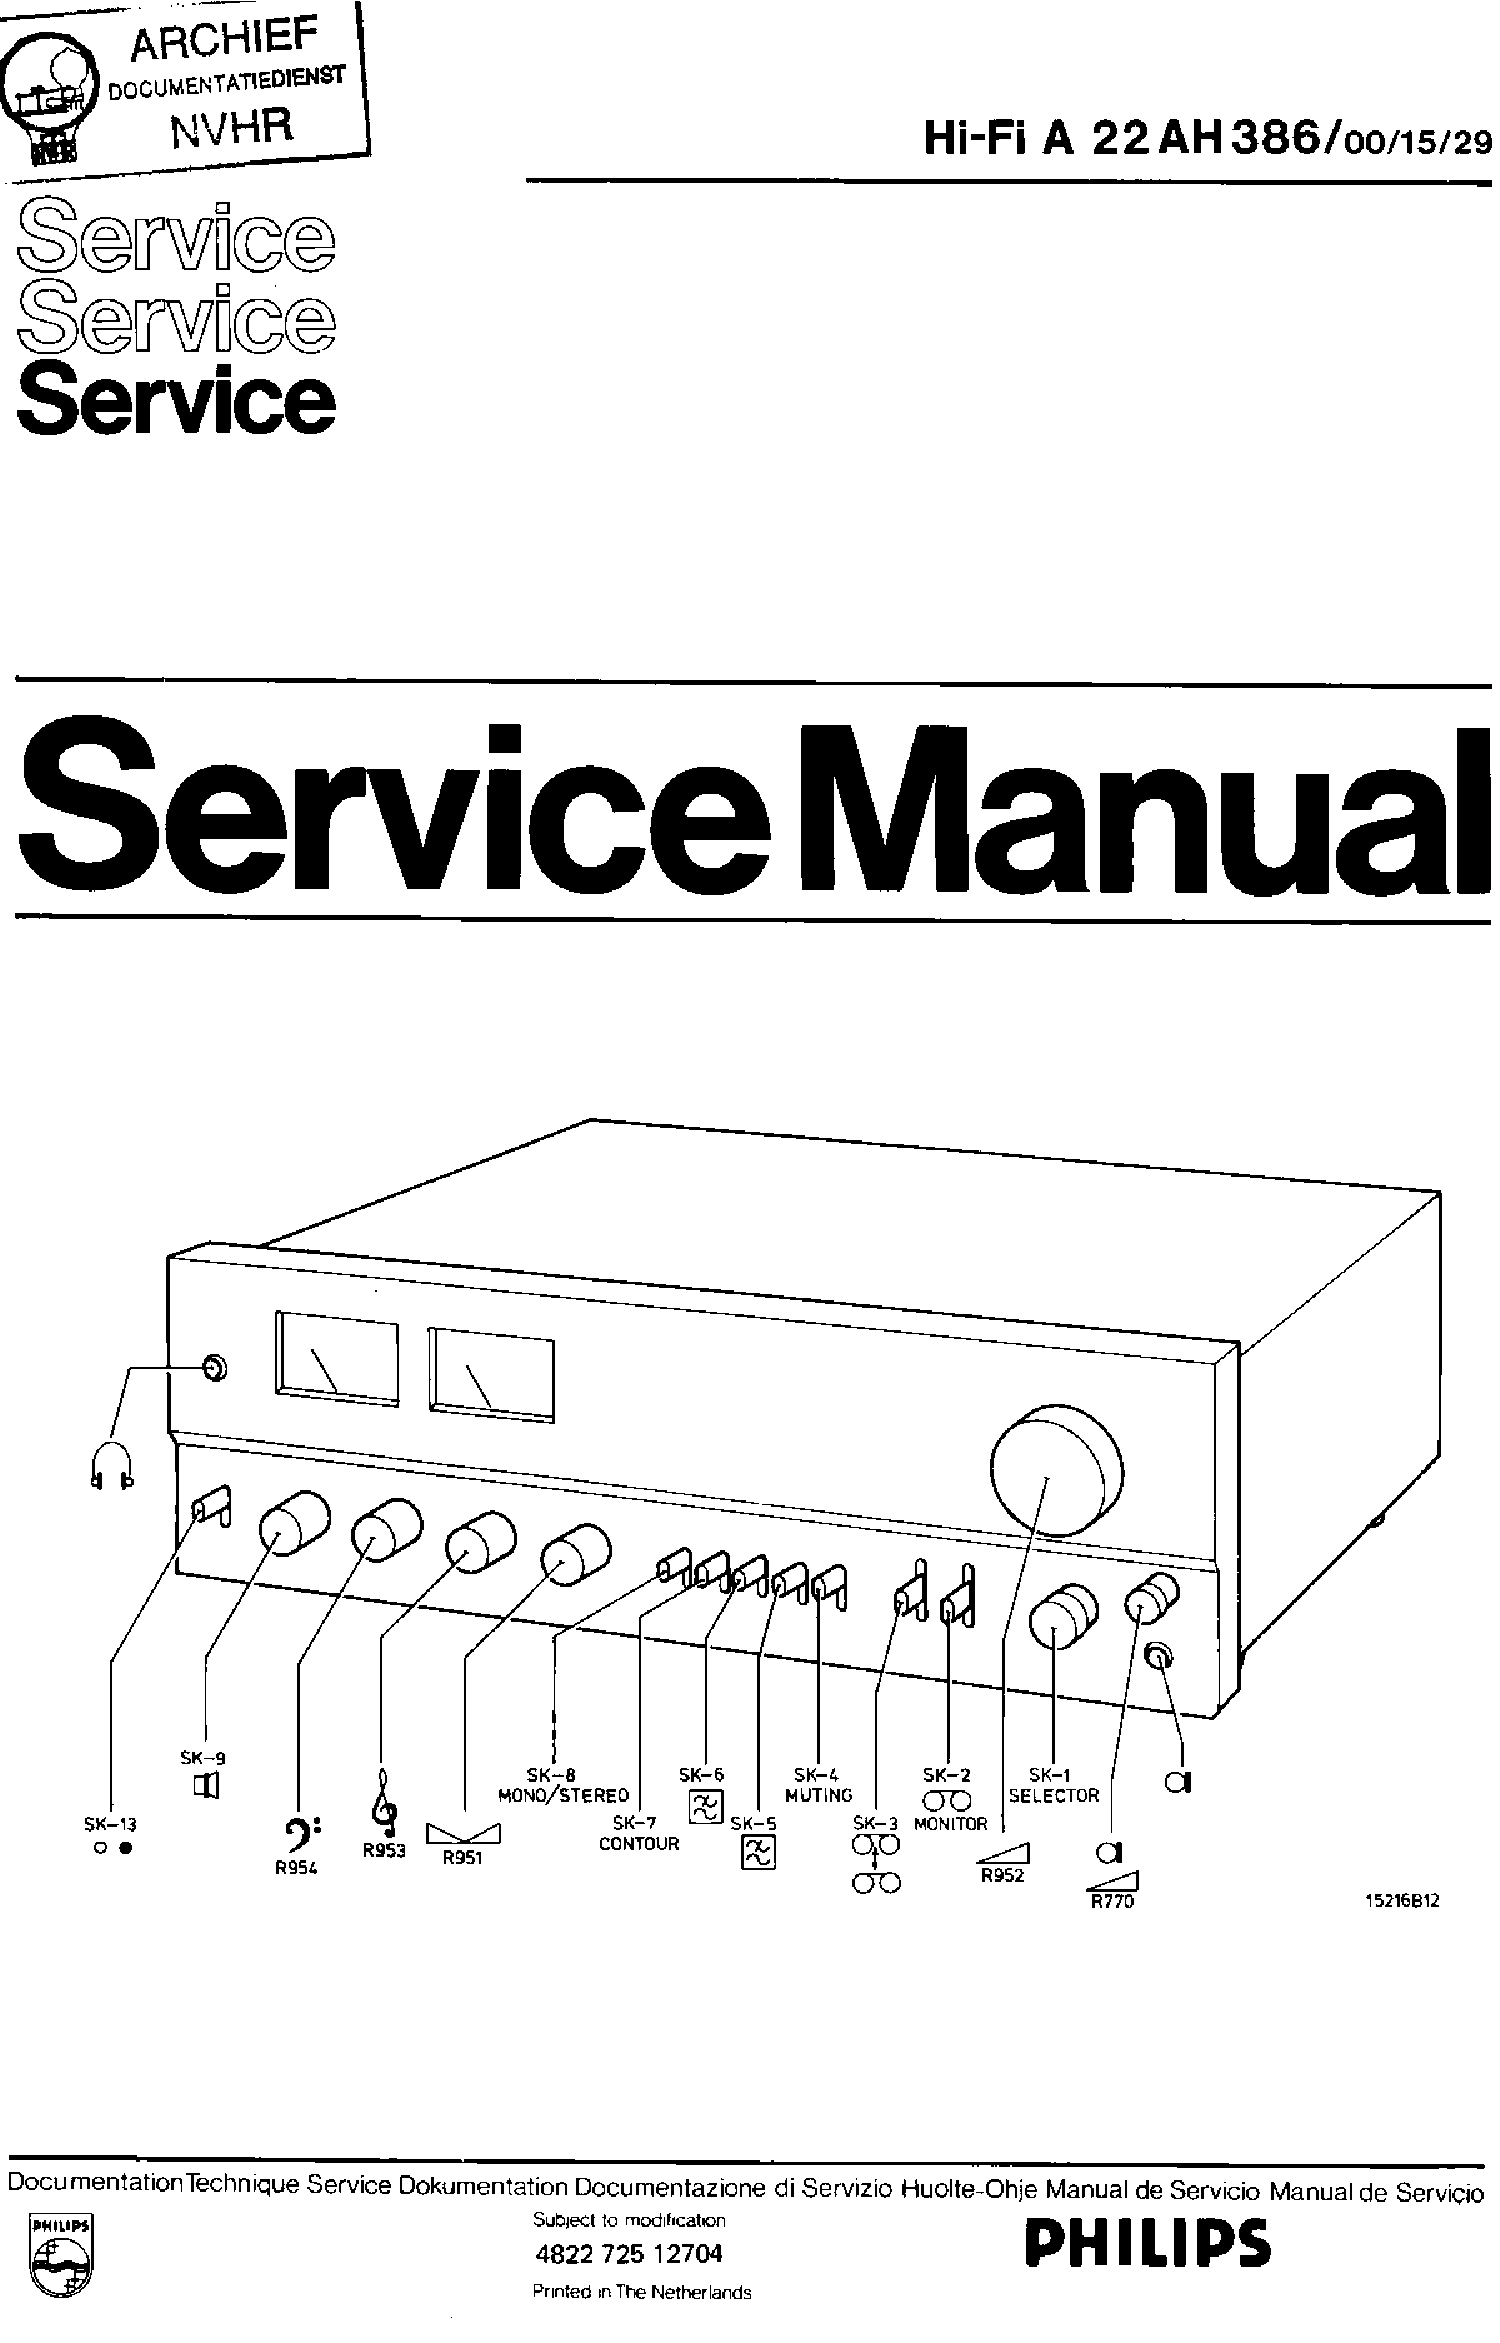 PHILIPS 22AH386 00 15 29 HIFI CENTER PA SM service manual (1st page)